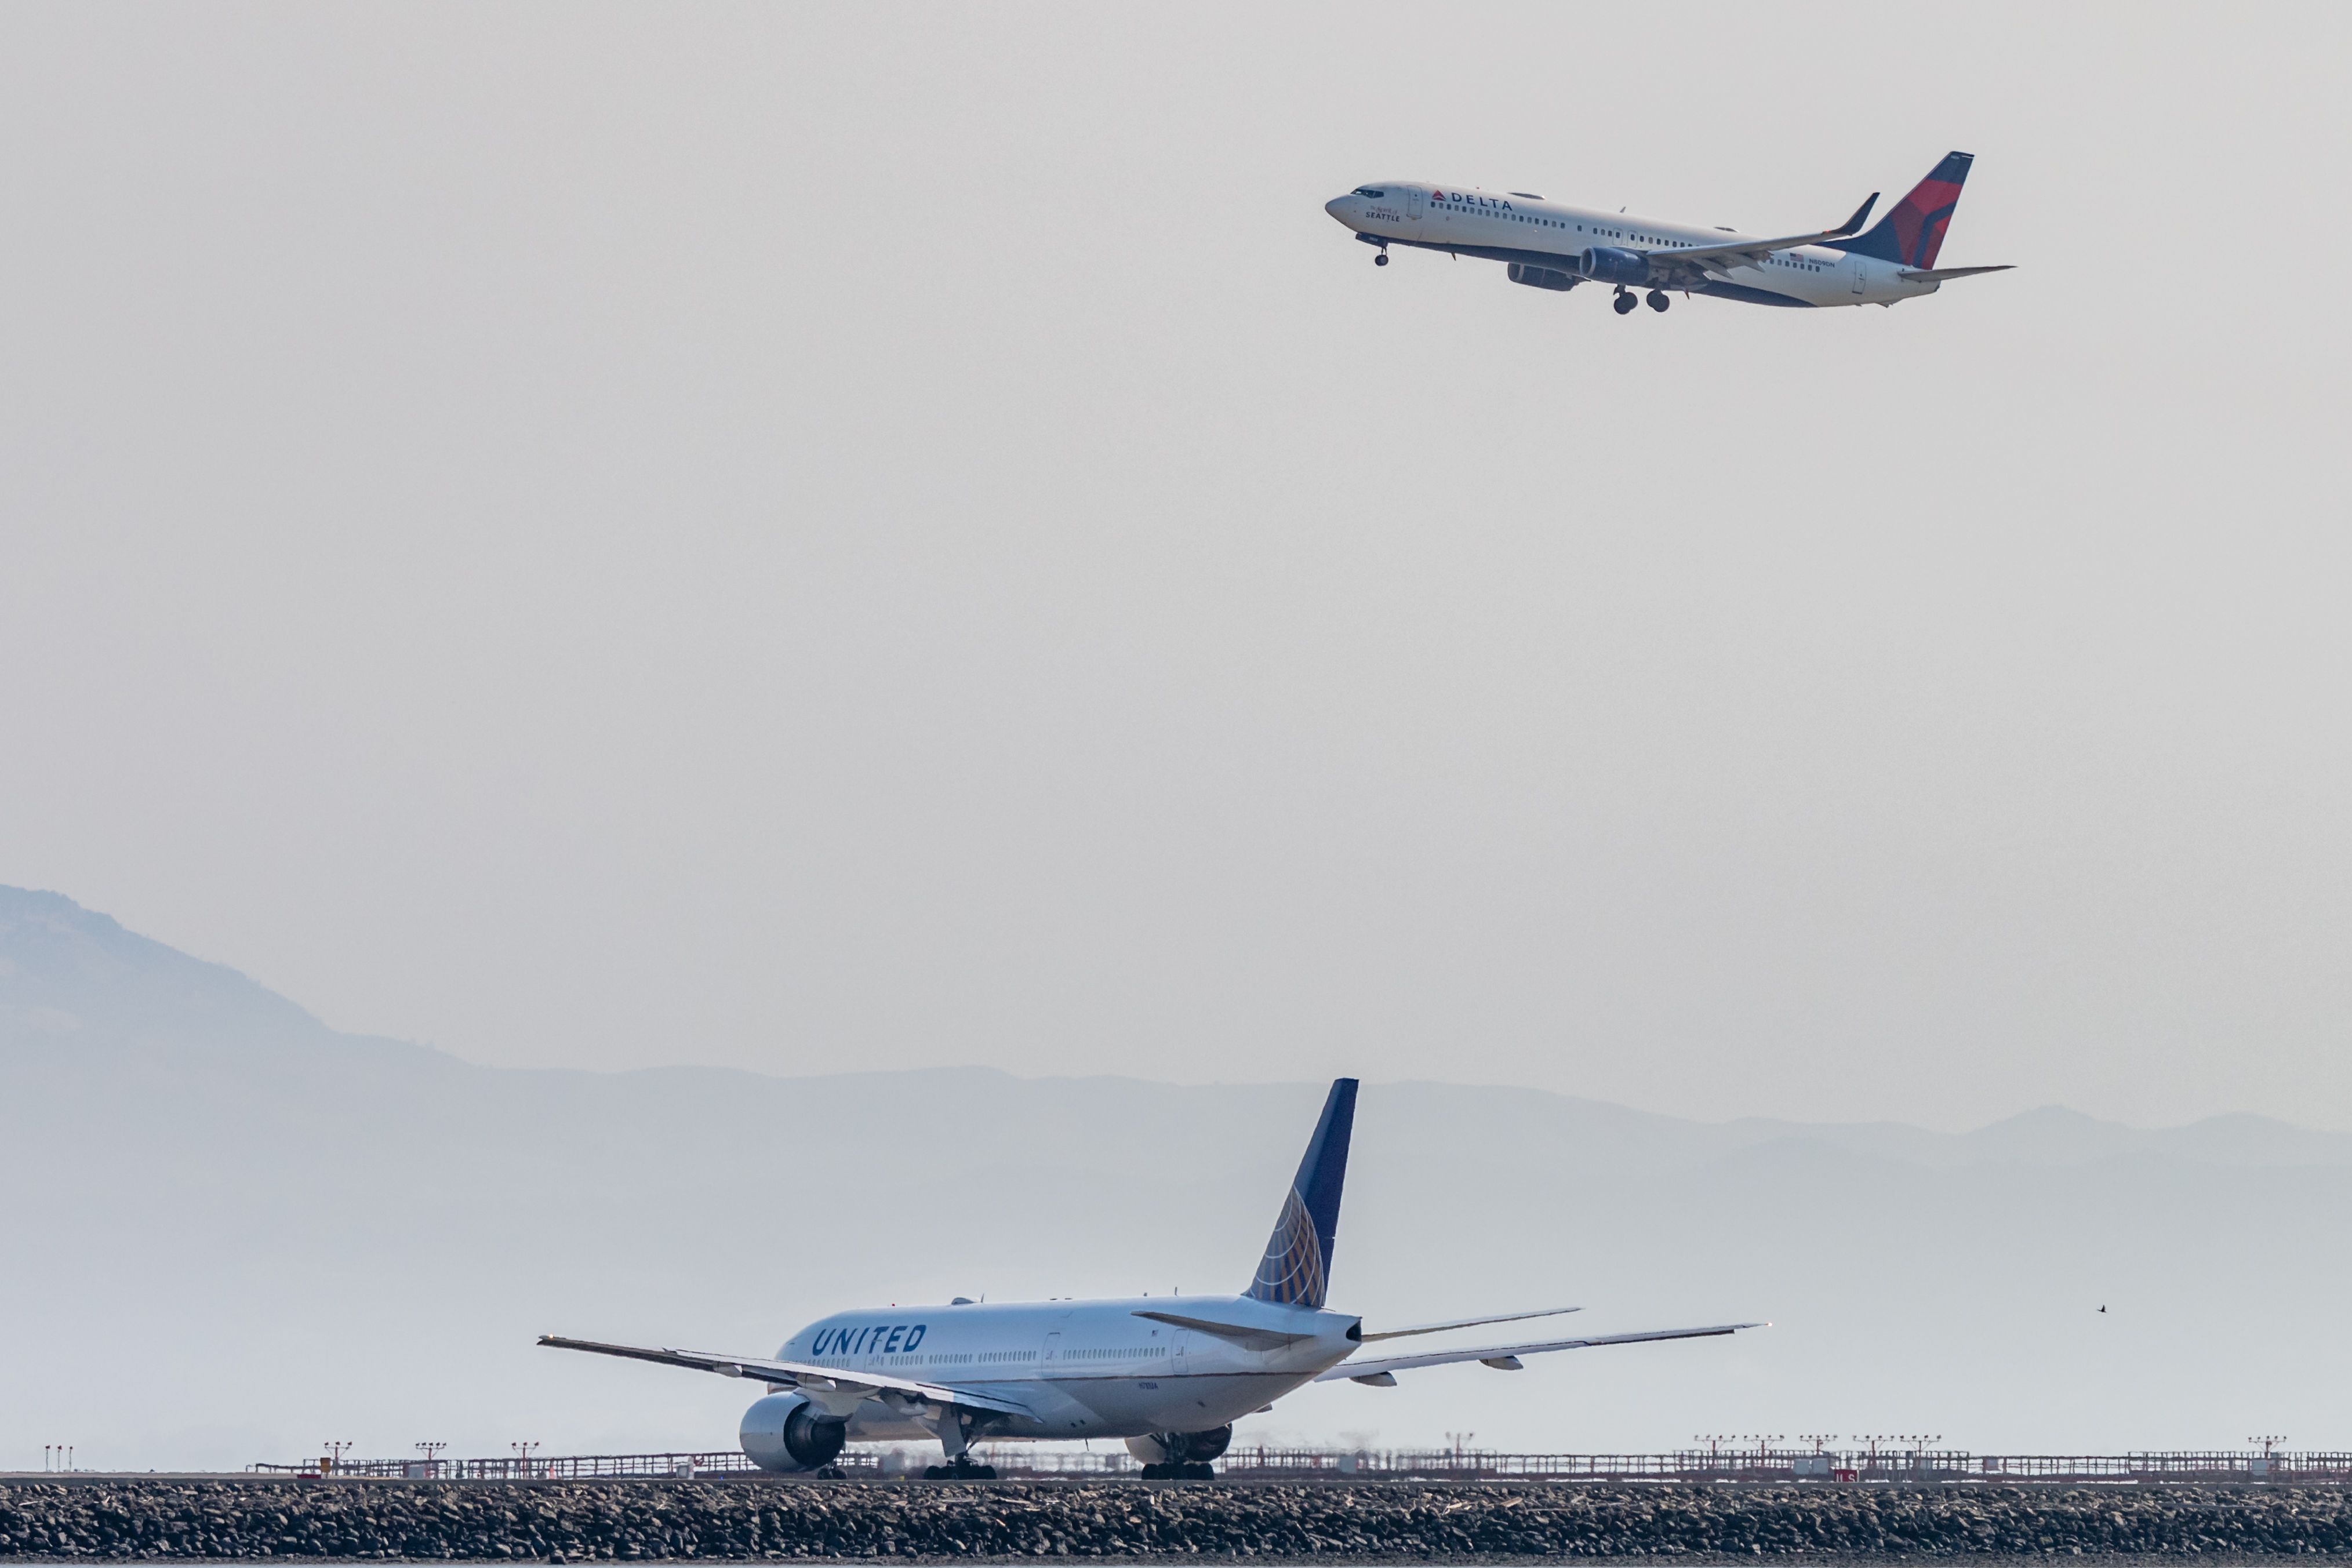 A United Airlines aircraft on the ground and a Delta Air LInes aircraft flying in the sky.